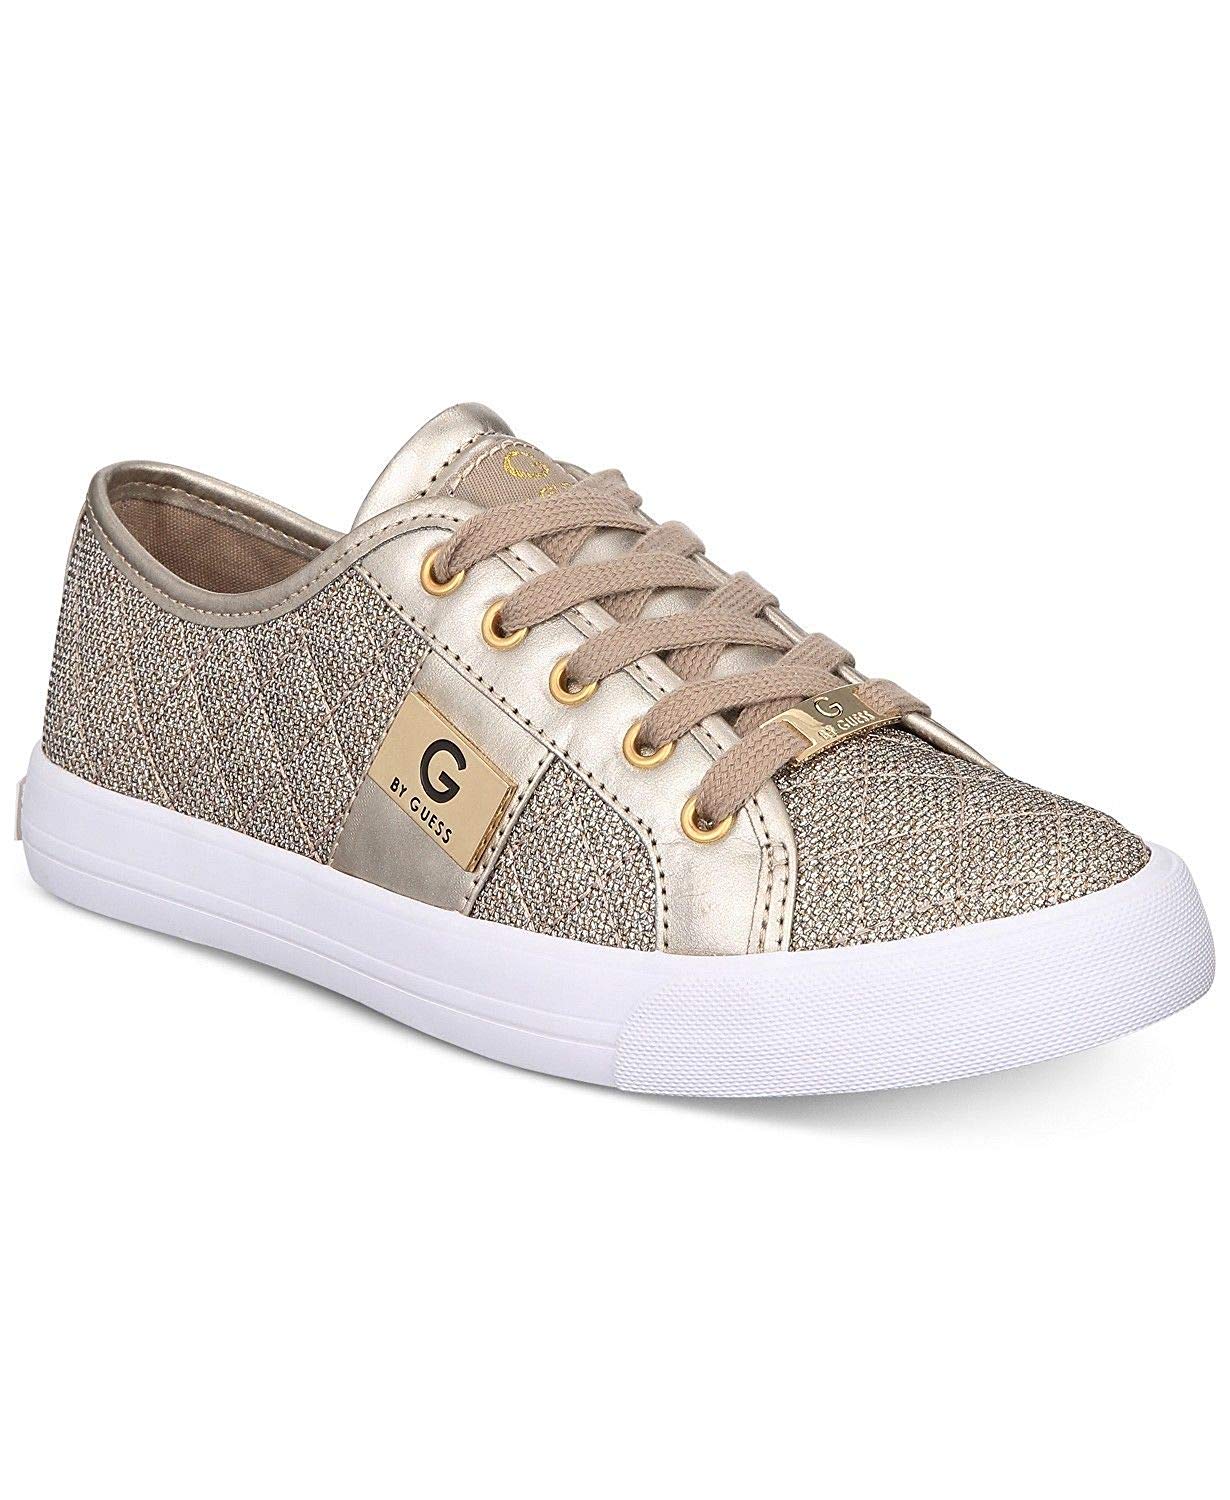 G by Guess Womens Backer2 Low Top Lace Up Fashion Sneakers, Gold, Size ...